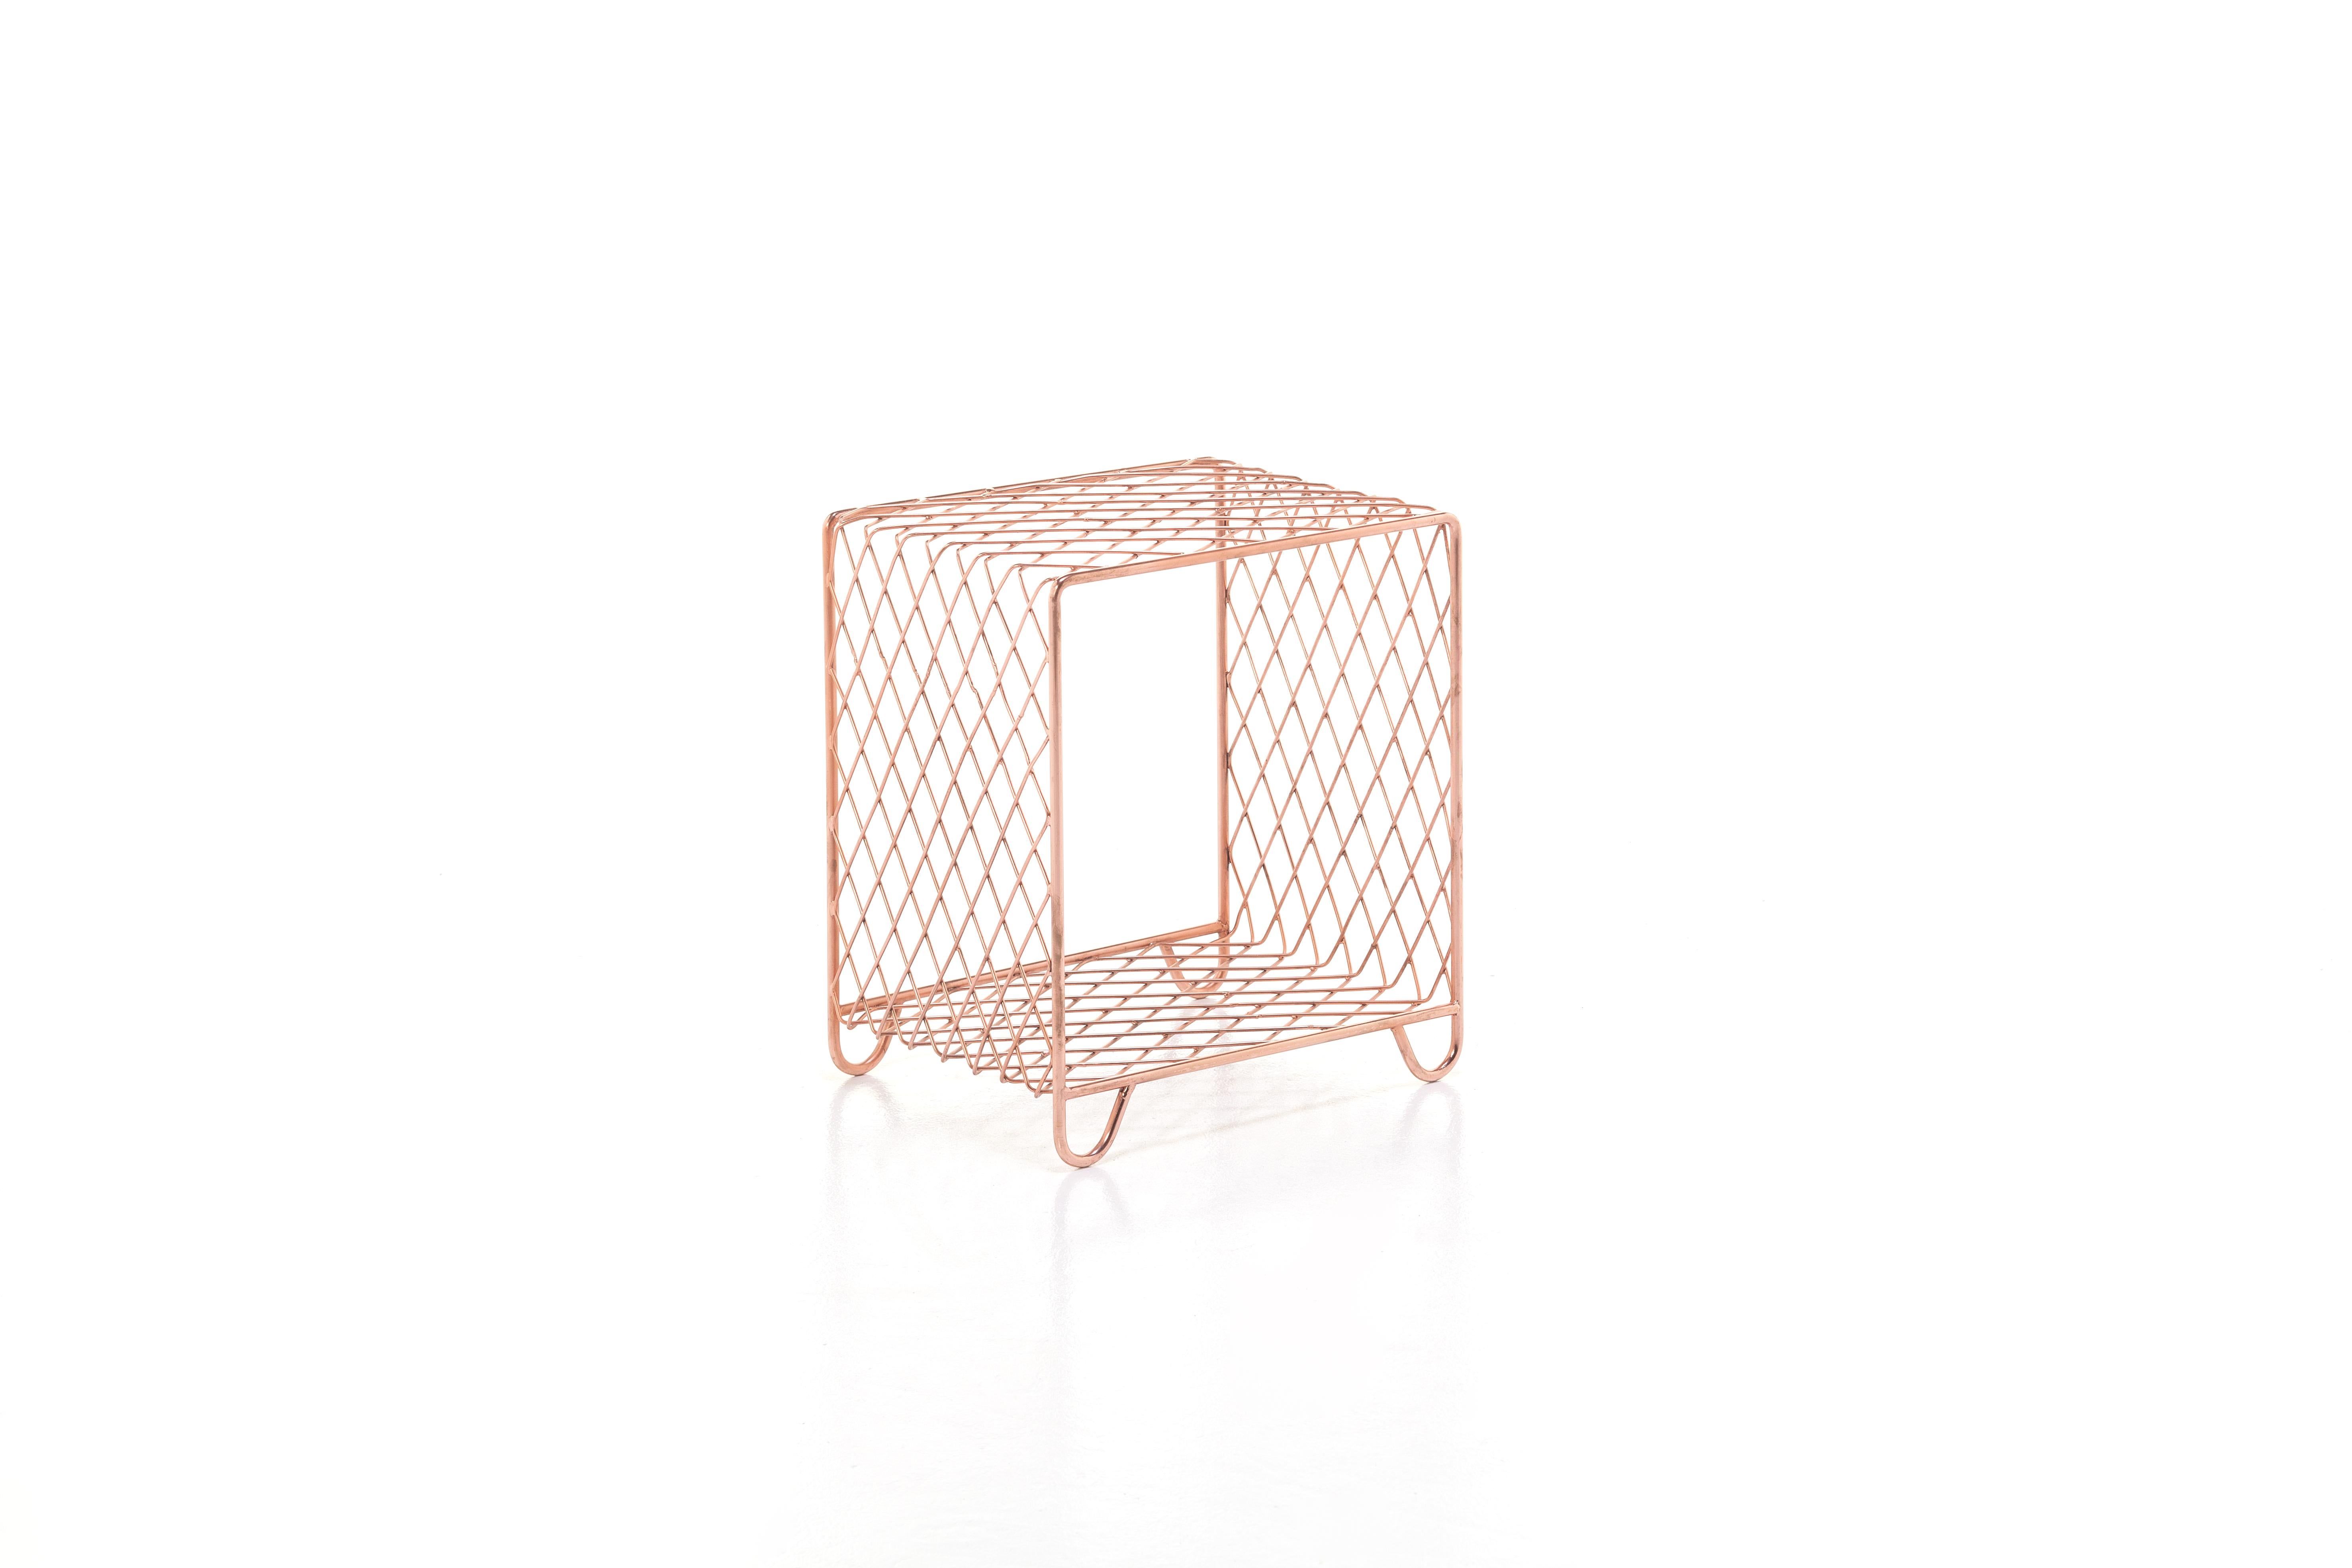 Coffee tables and mesh magazine racks in copper-plated steel wire make up the Cross collection. The mesh is folded and shaped in different configurations that give life to a family of furnishings with small dimensions that, thanks to their structure